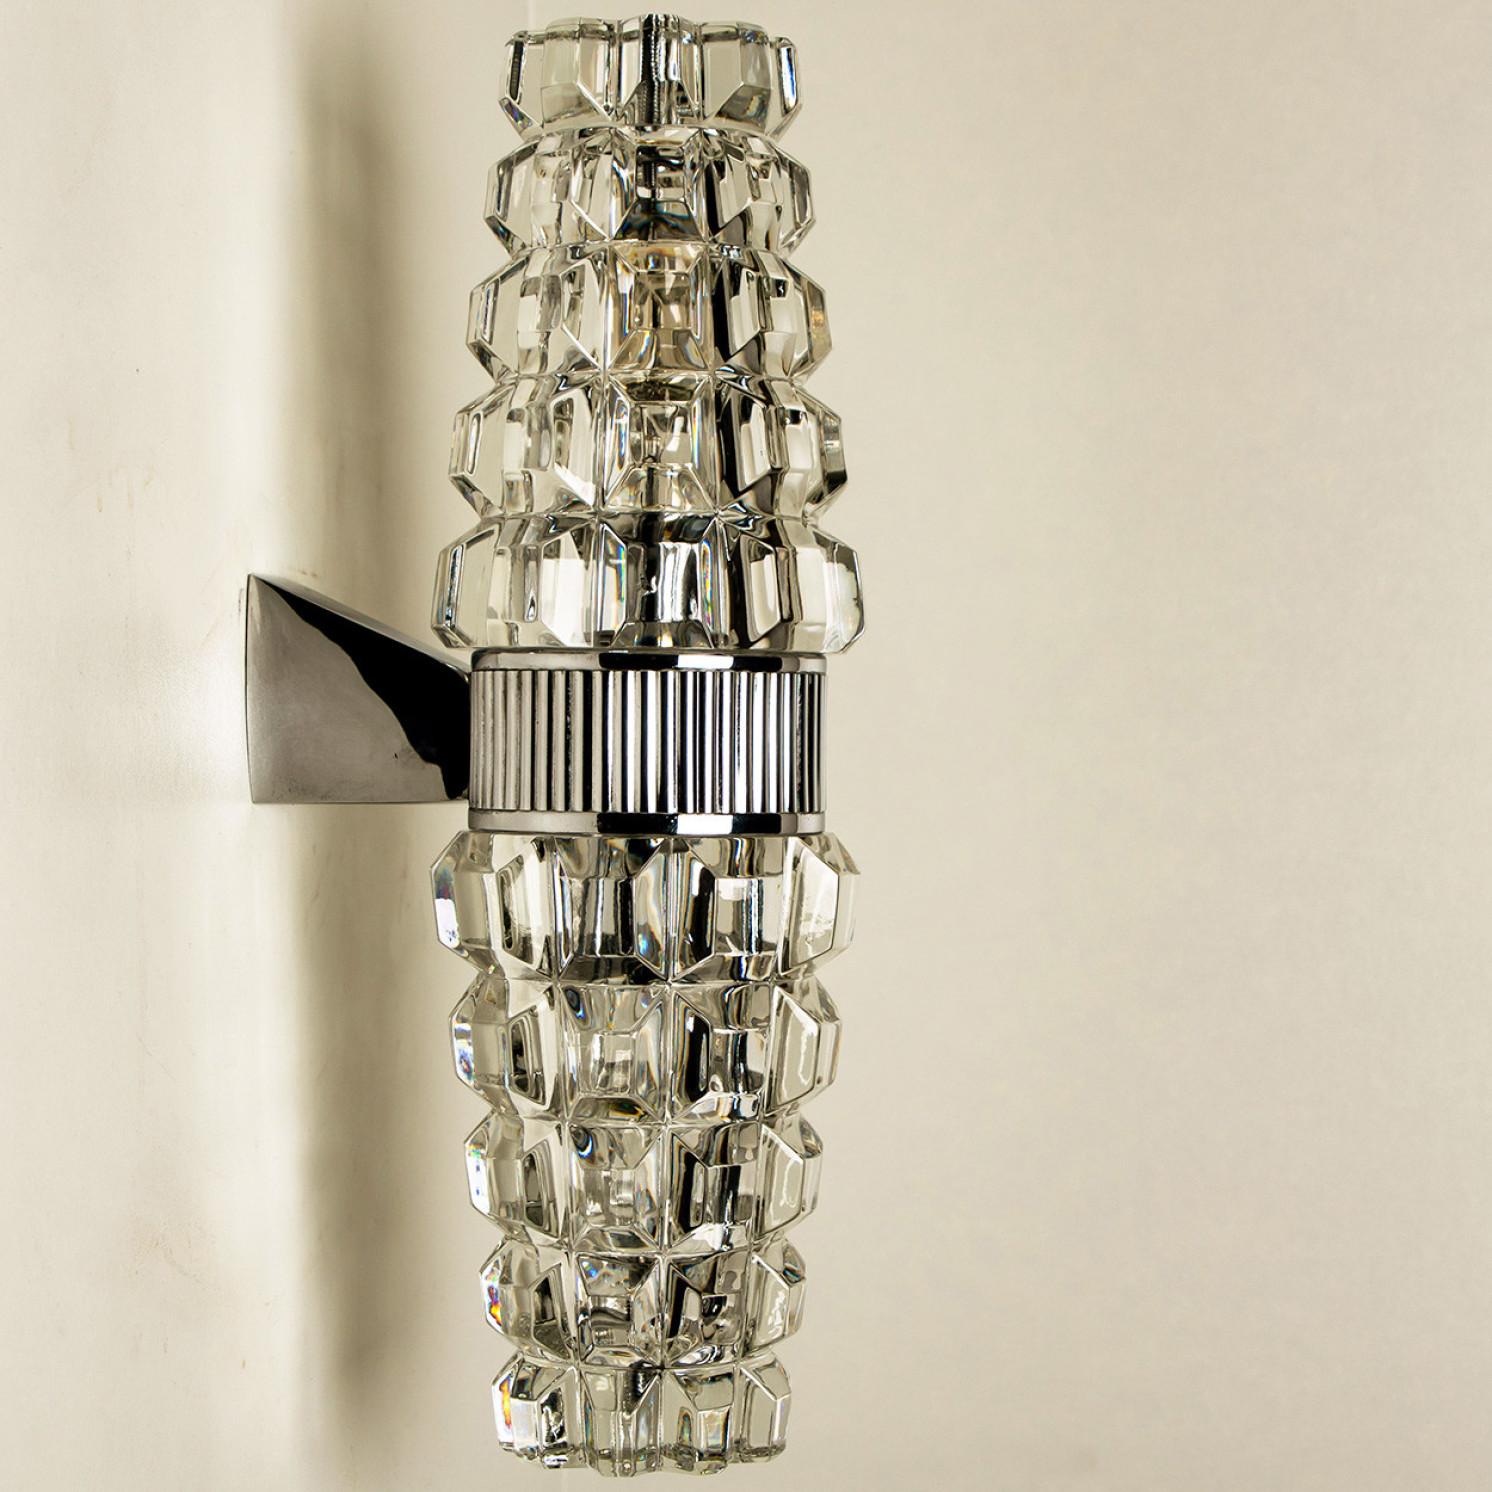 Hourglass Shaped Chrome Wallsconce, France, Europe, 1970s For Sale 3